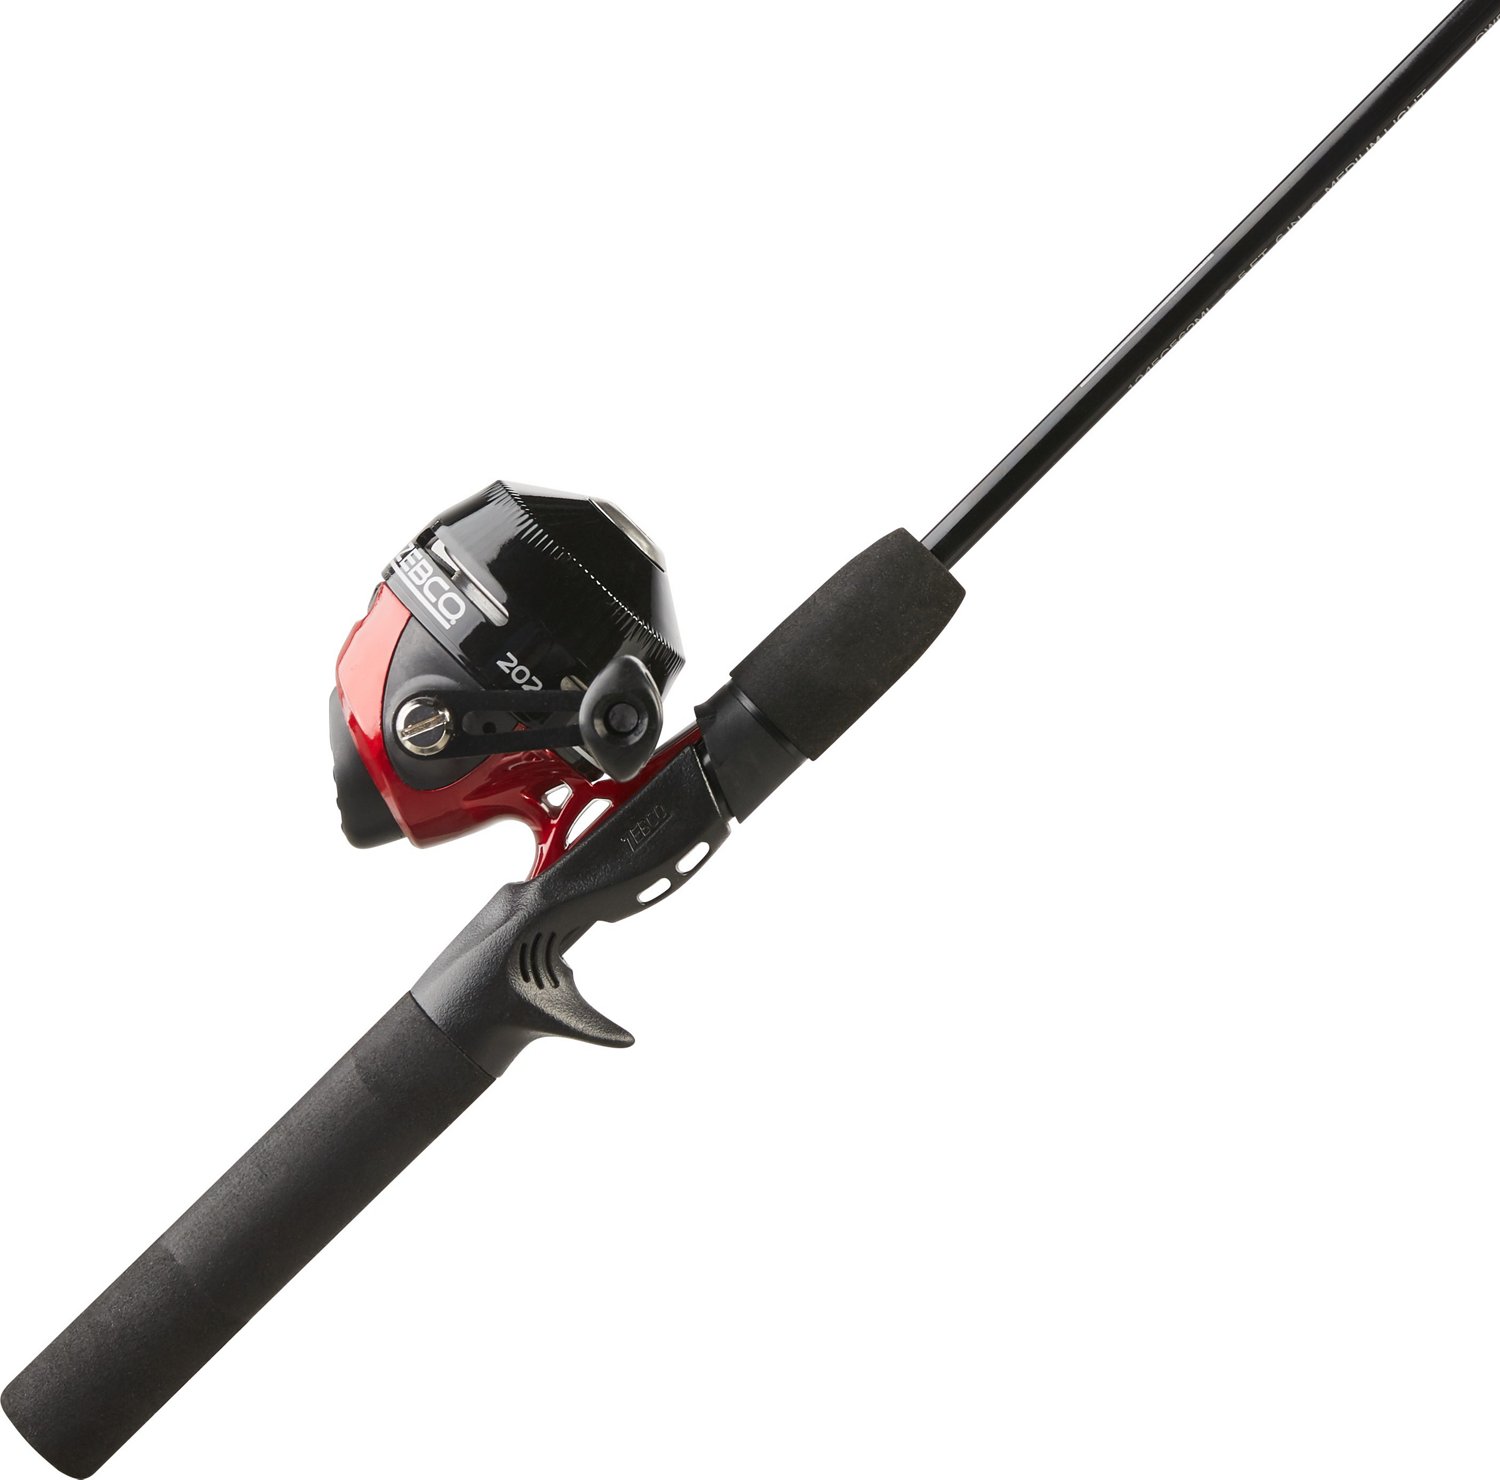  Zebco 202 Spincast Reel and Fishing Rod Combo, 5-Foot 6-Inch  2-Piece Fishing Pole, Size 30 Reel, Right-Hand Retrieve, Pre-Spooled with 10-Pound  Cajun Line, Black/Red : Sports & Outdoors